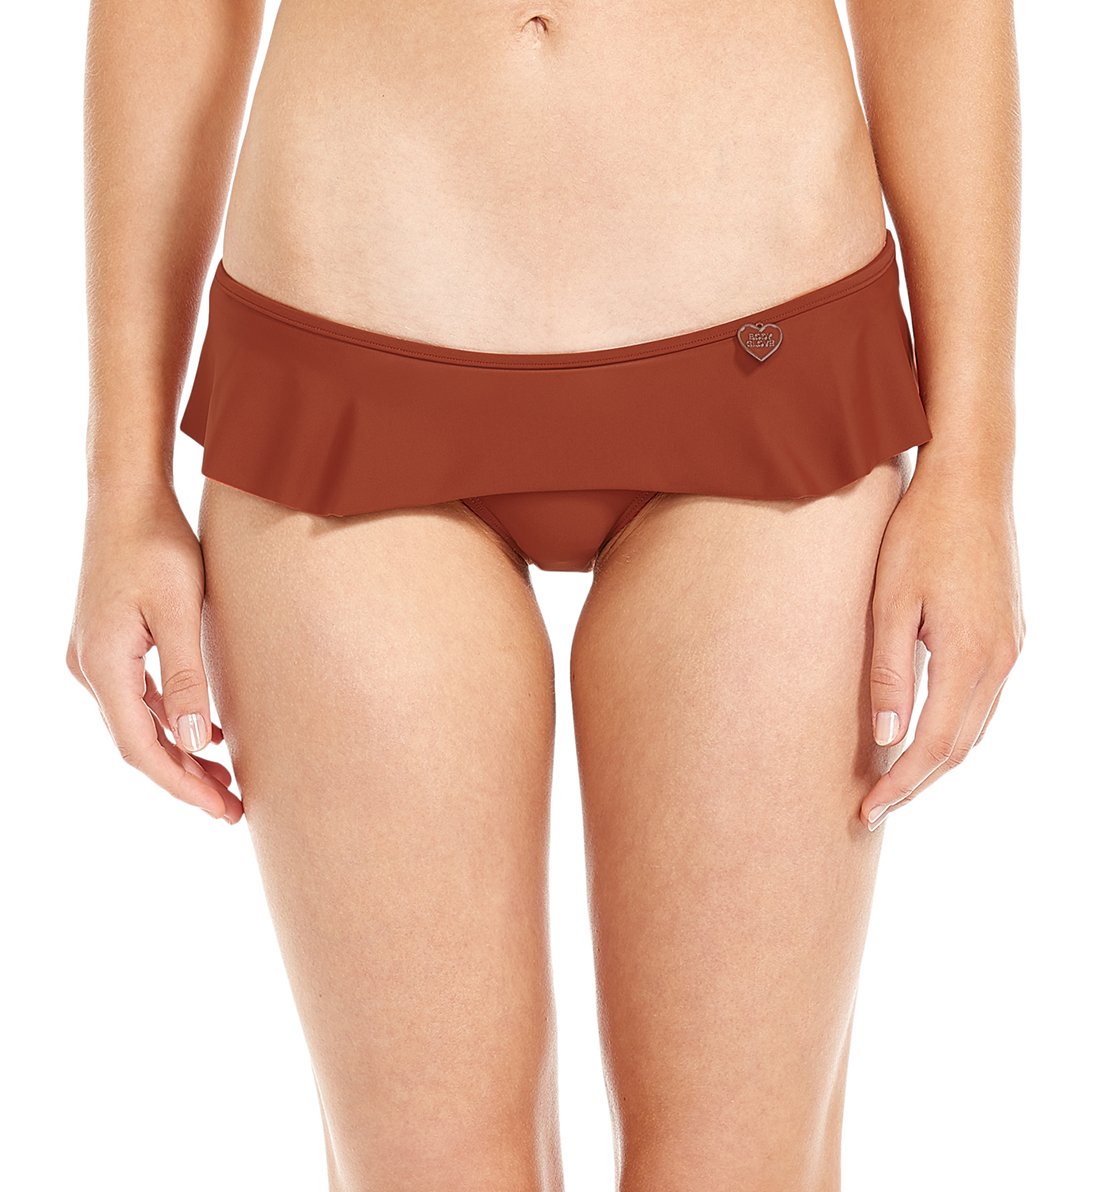 Body Glove Smoothies Lily Mid Rise Frilled Bikini Brief (39506137),XS,Terracotta - Terracotta,XS